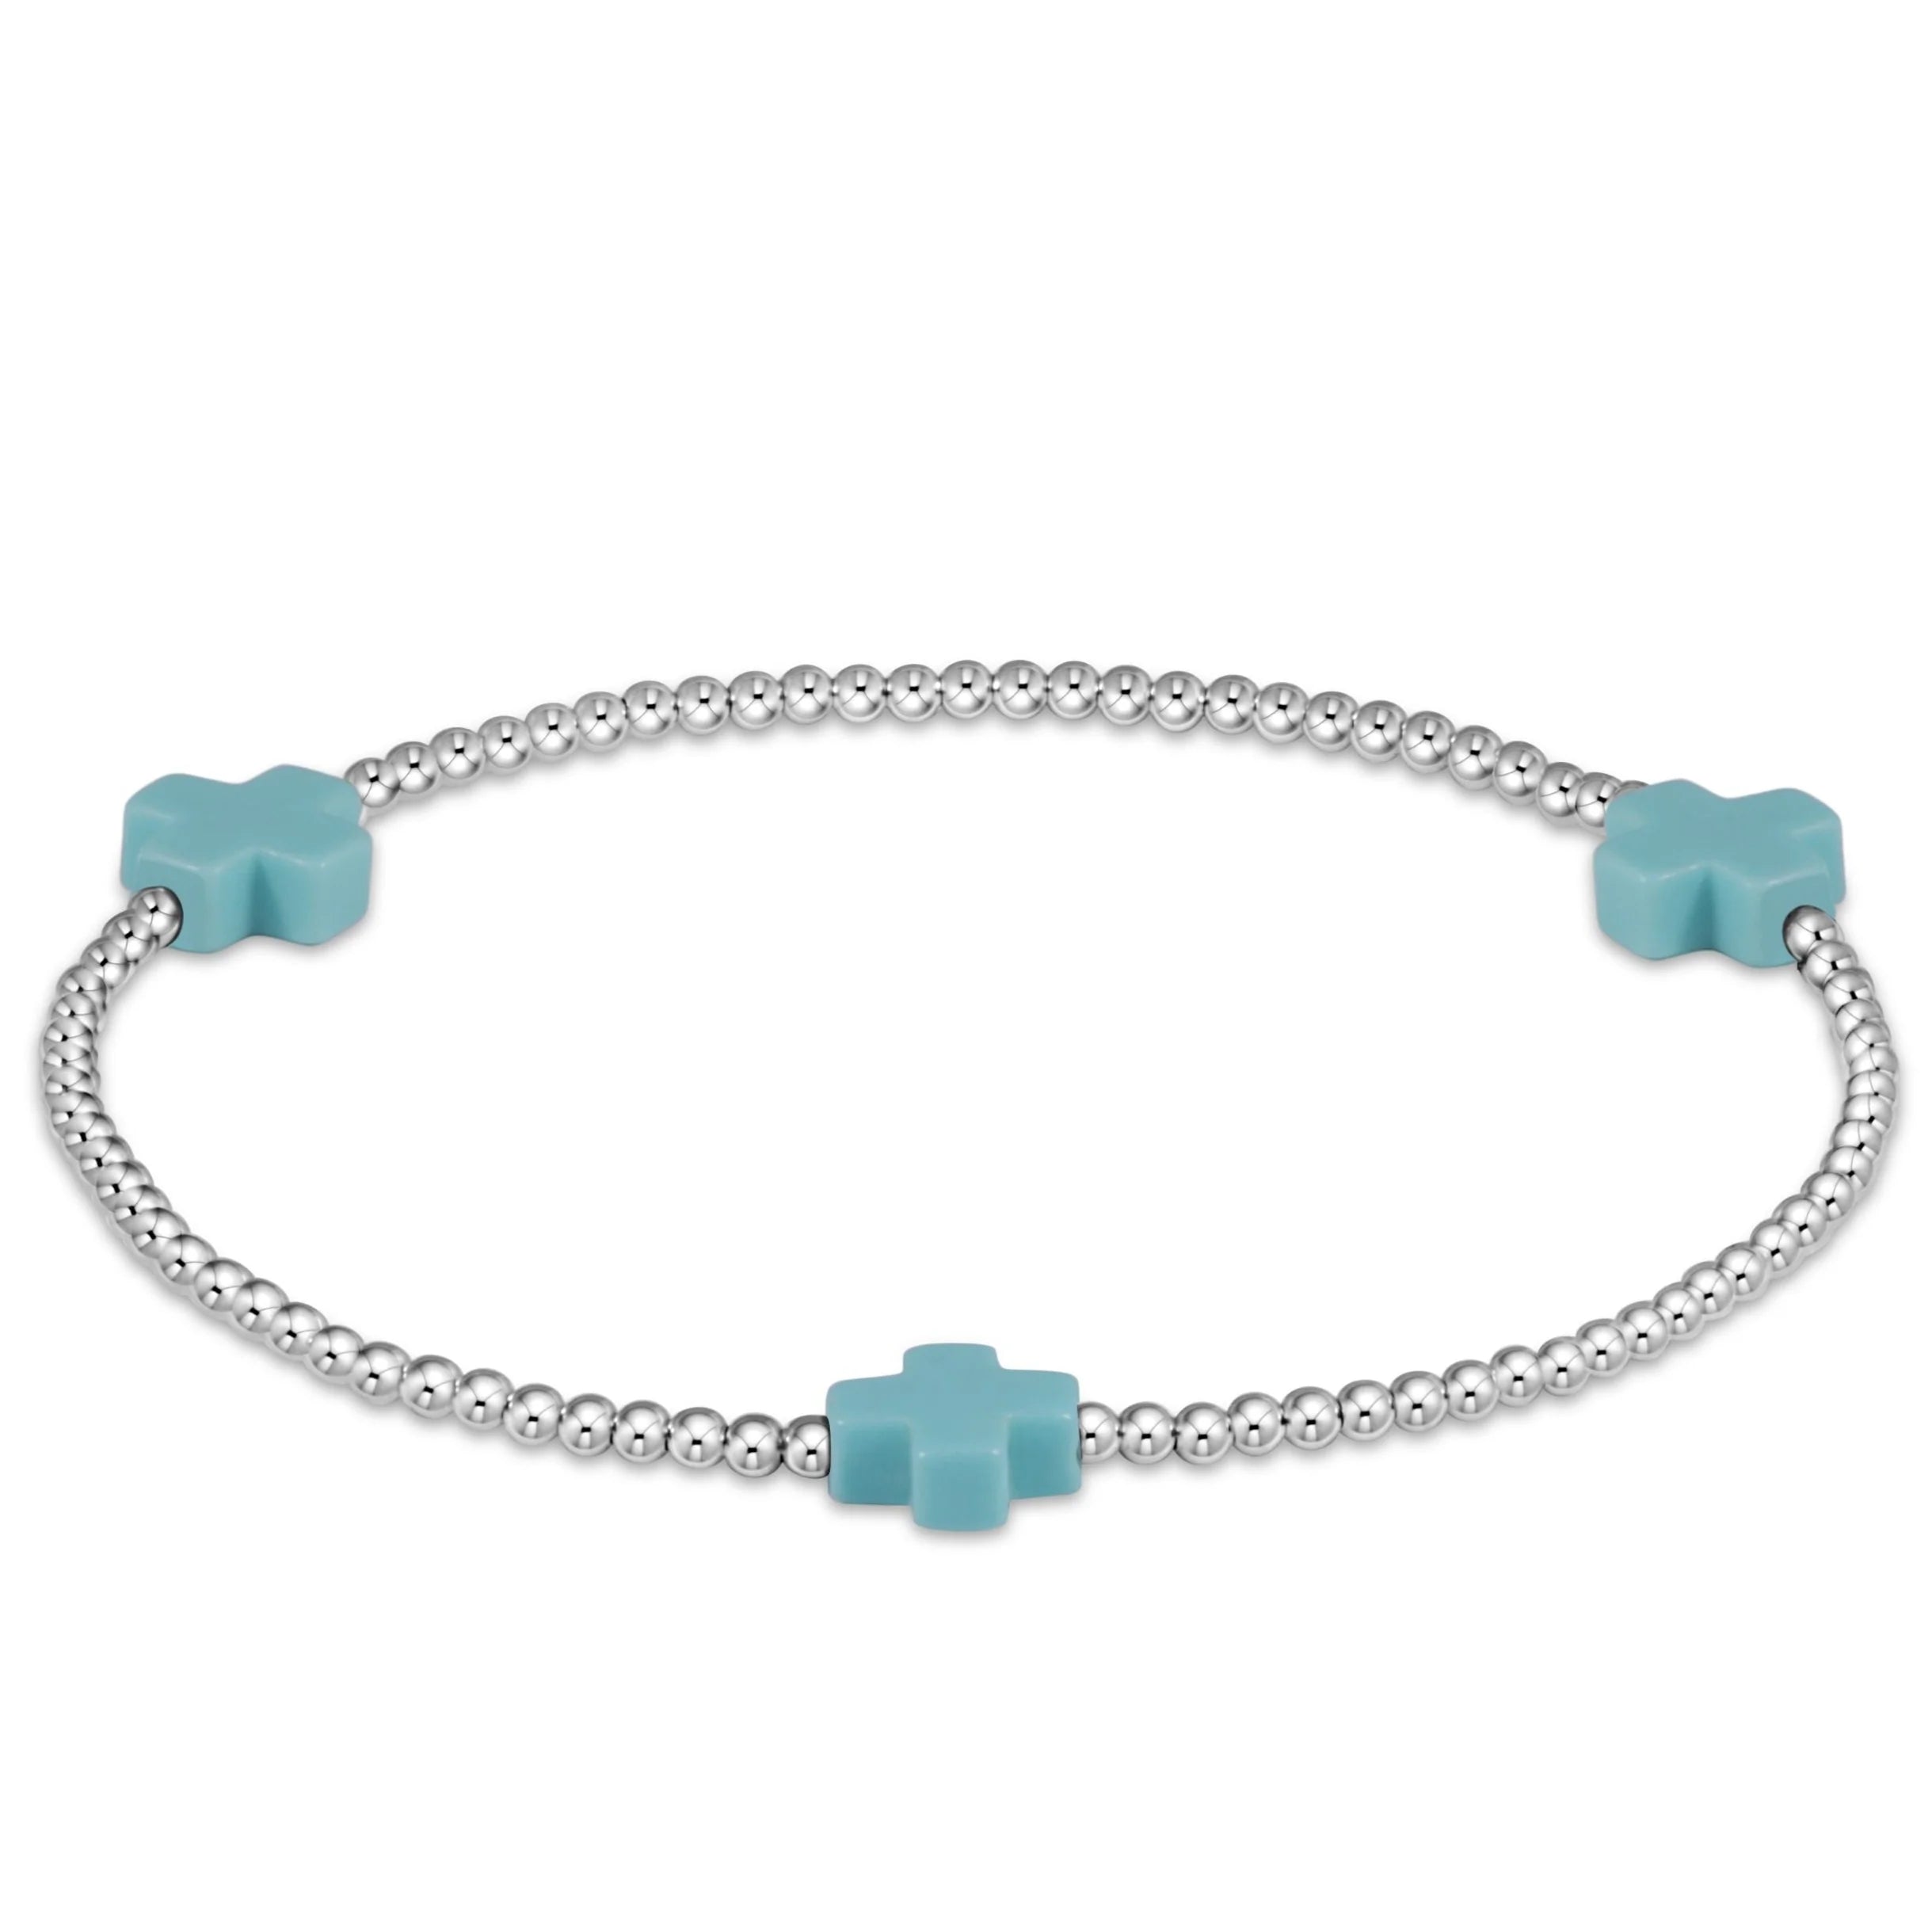 Sterling Silver Signature Cross 3mm Bead Bracelet- Turquoise